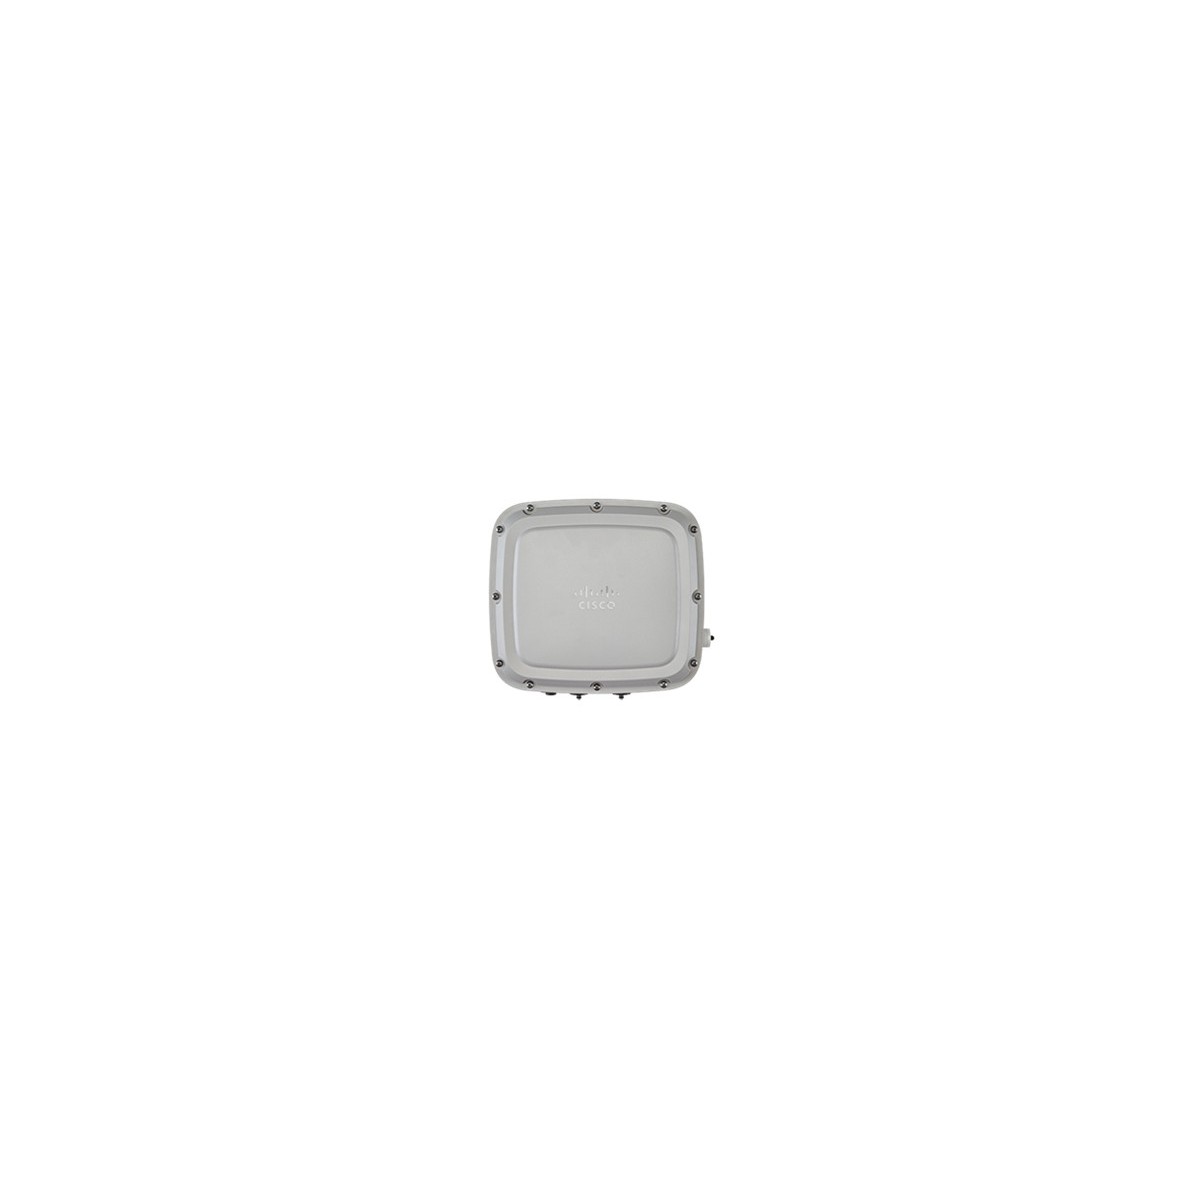 Cisco WI-FI 6 OUTDOOR AP INTERNAL ANT - Access Point